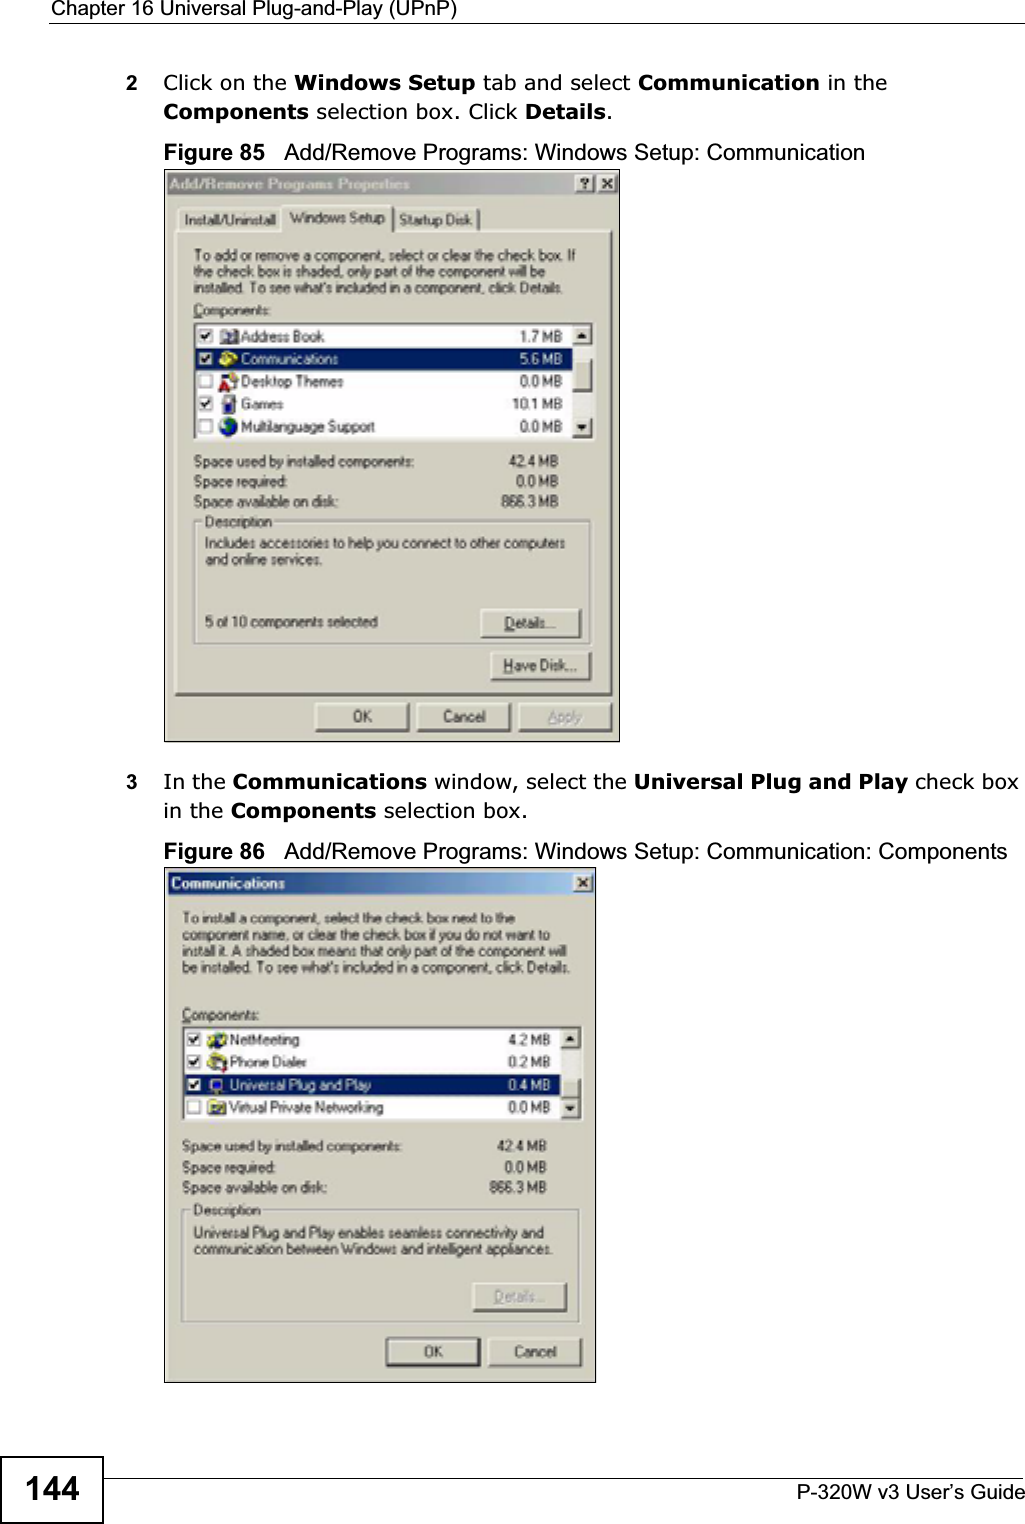 Chapter 16 Universal Plug-and-Play (UPnP)P-320W v3 User’s Guide1442Click on the Windows Setup tab and select Communication in the Components selection box. Click Details.Figure 85   Add/Remove Programs: Windows Setup: Communication 3In the Communications window, select the Universal Plug and Play check box in the Components selection box. Figure 86   Add/Remove Programs: Windows Setup: Communication: Components